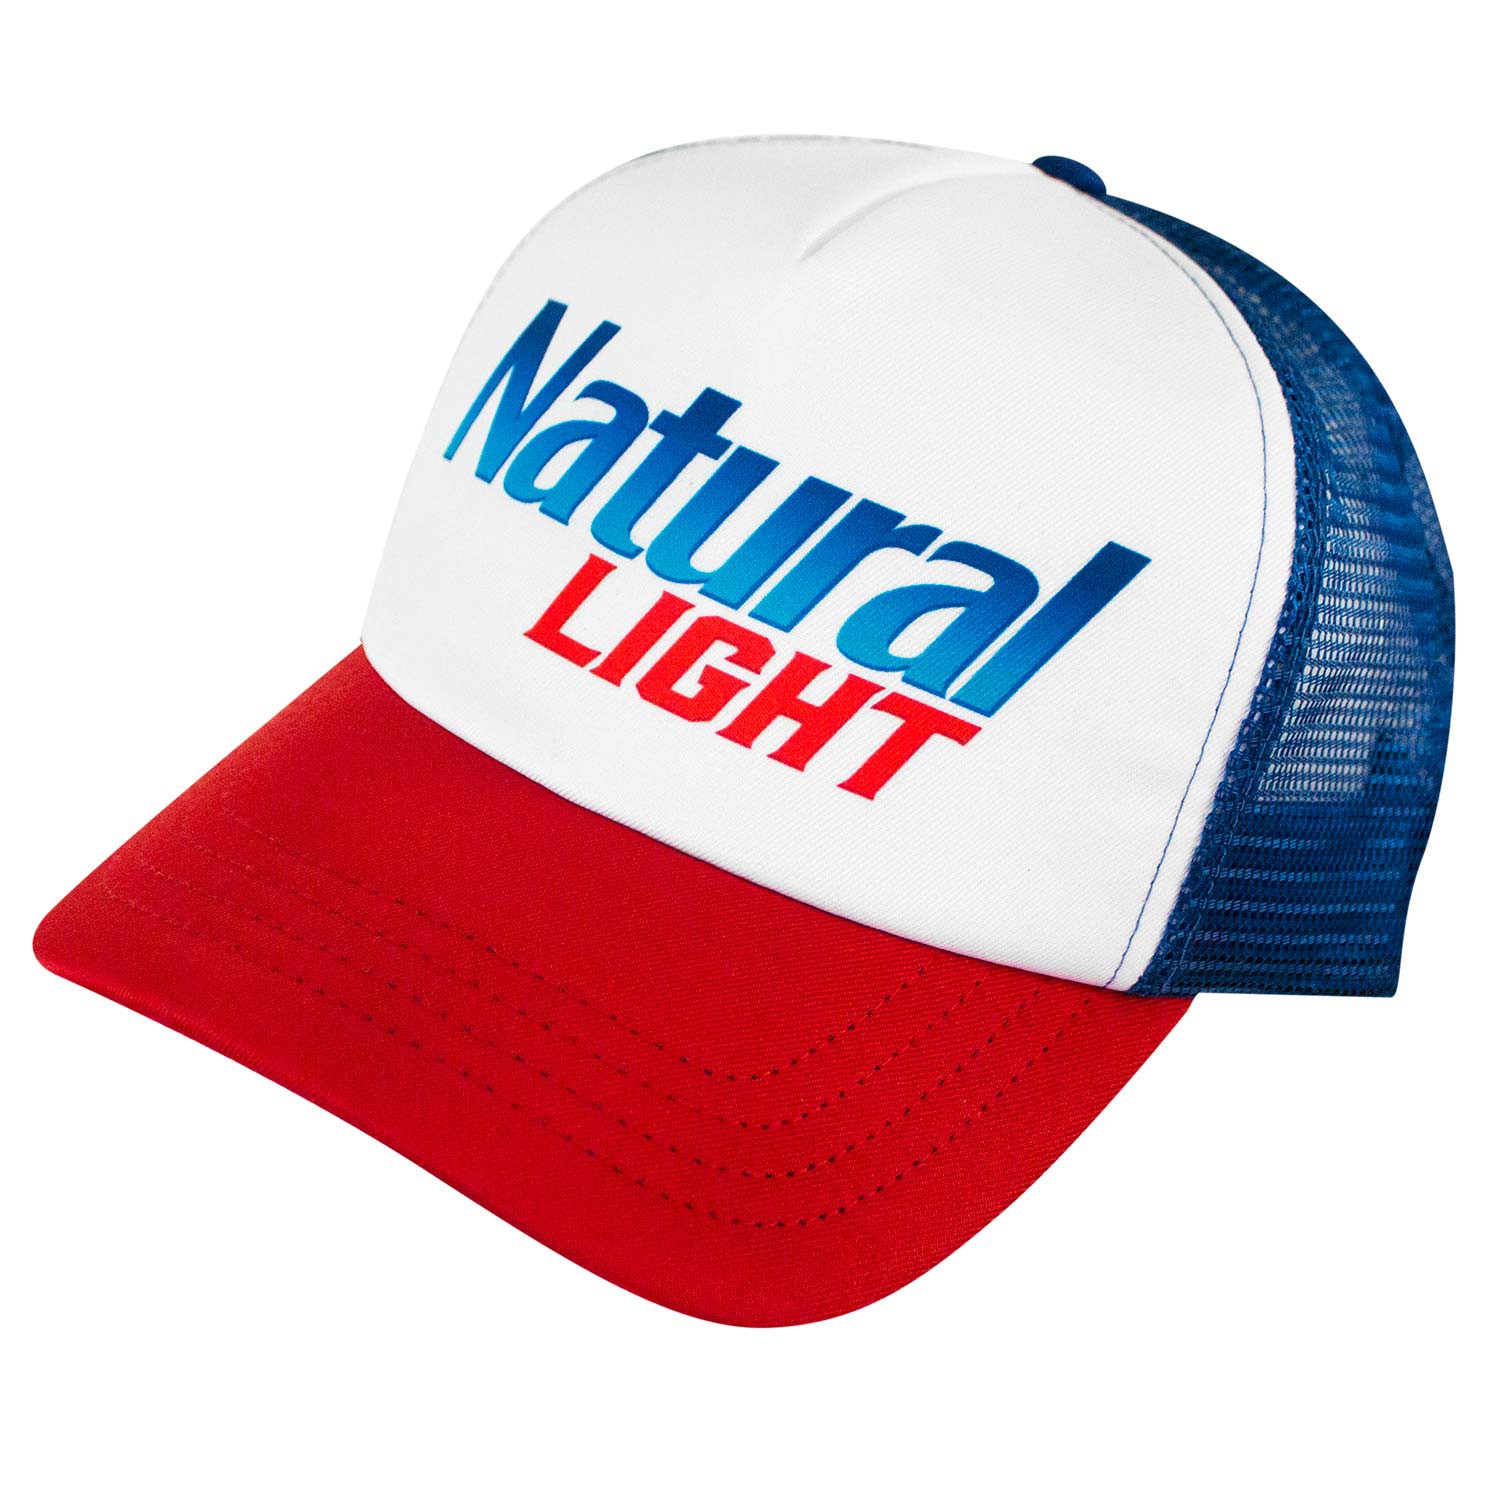 https://mmv2api.s3.us-east-2.amazonaws.com/products/images/Natural_Light_Red_White_Blue_Hat_LG.jpg